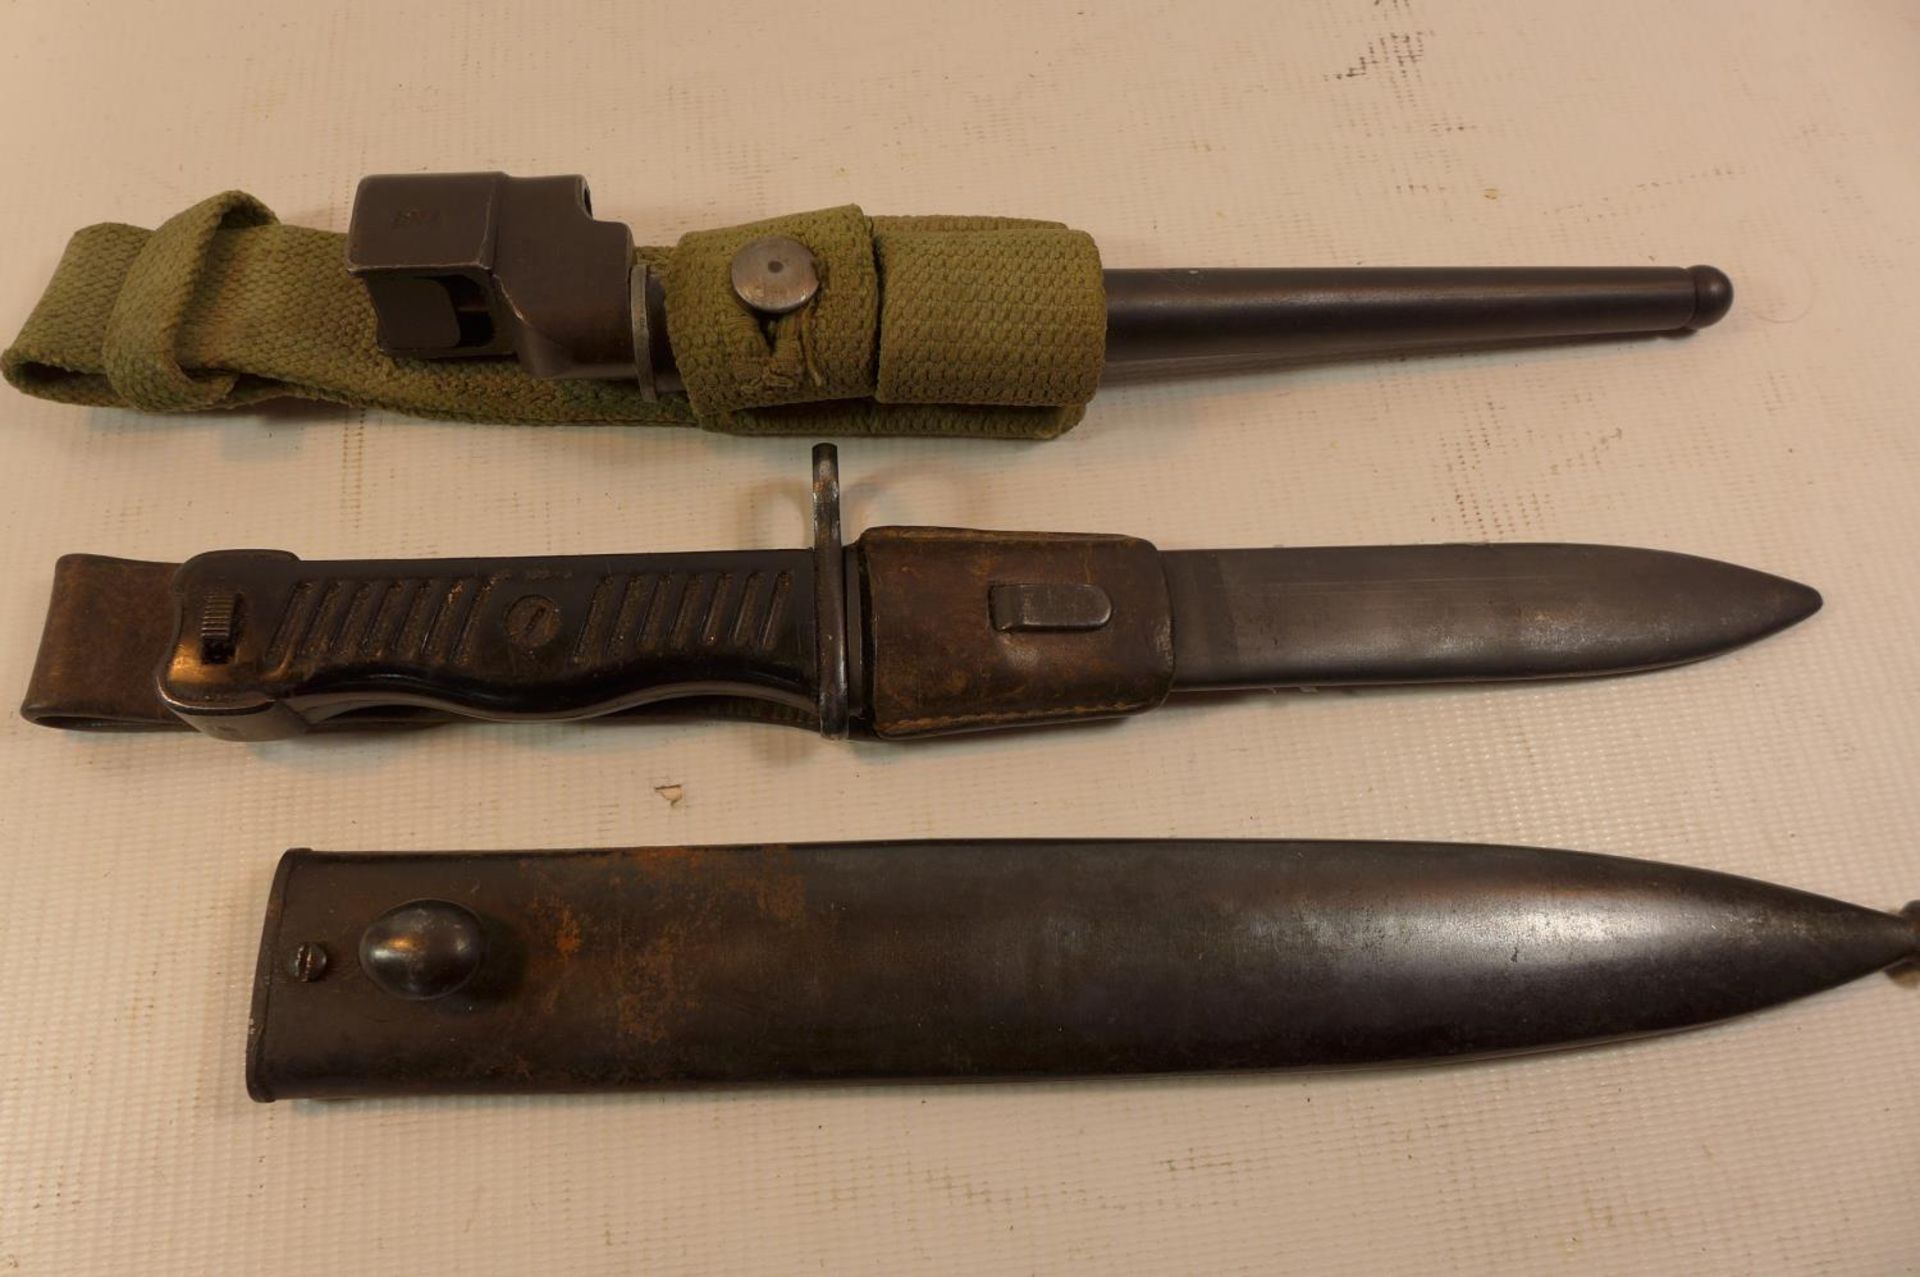 A YUGOSLAVIAN M56 BAYONET FOR RM1956 SUB MACHINE GUN, 17.5CM BLADE, COMPELTE WITH FROG, MARK II - Image 3 of 4